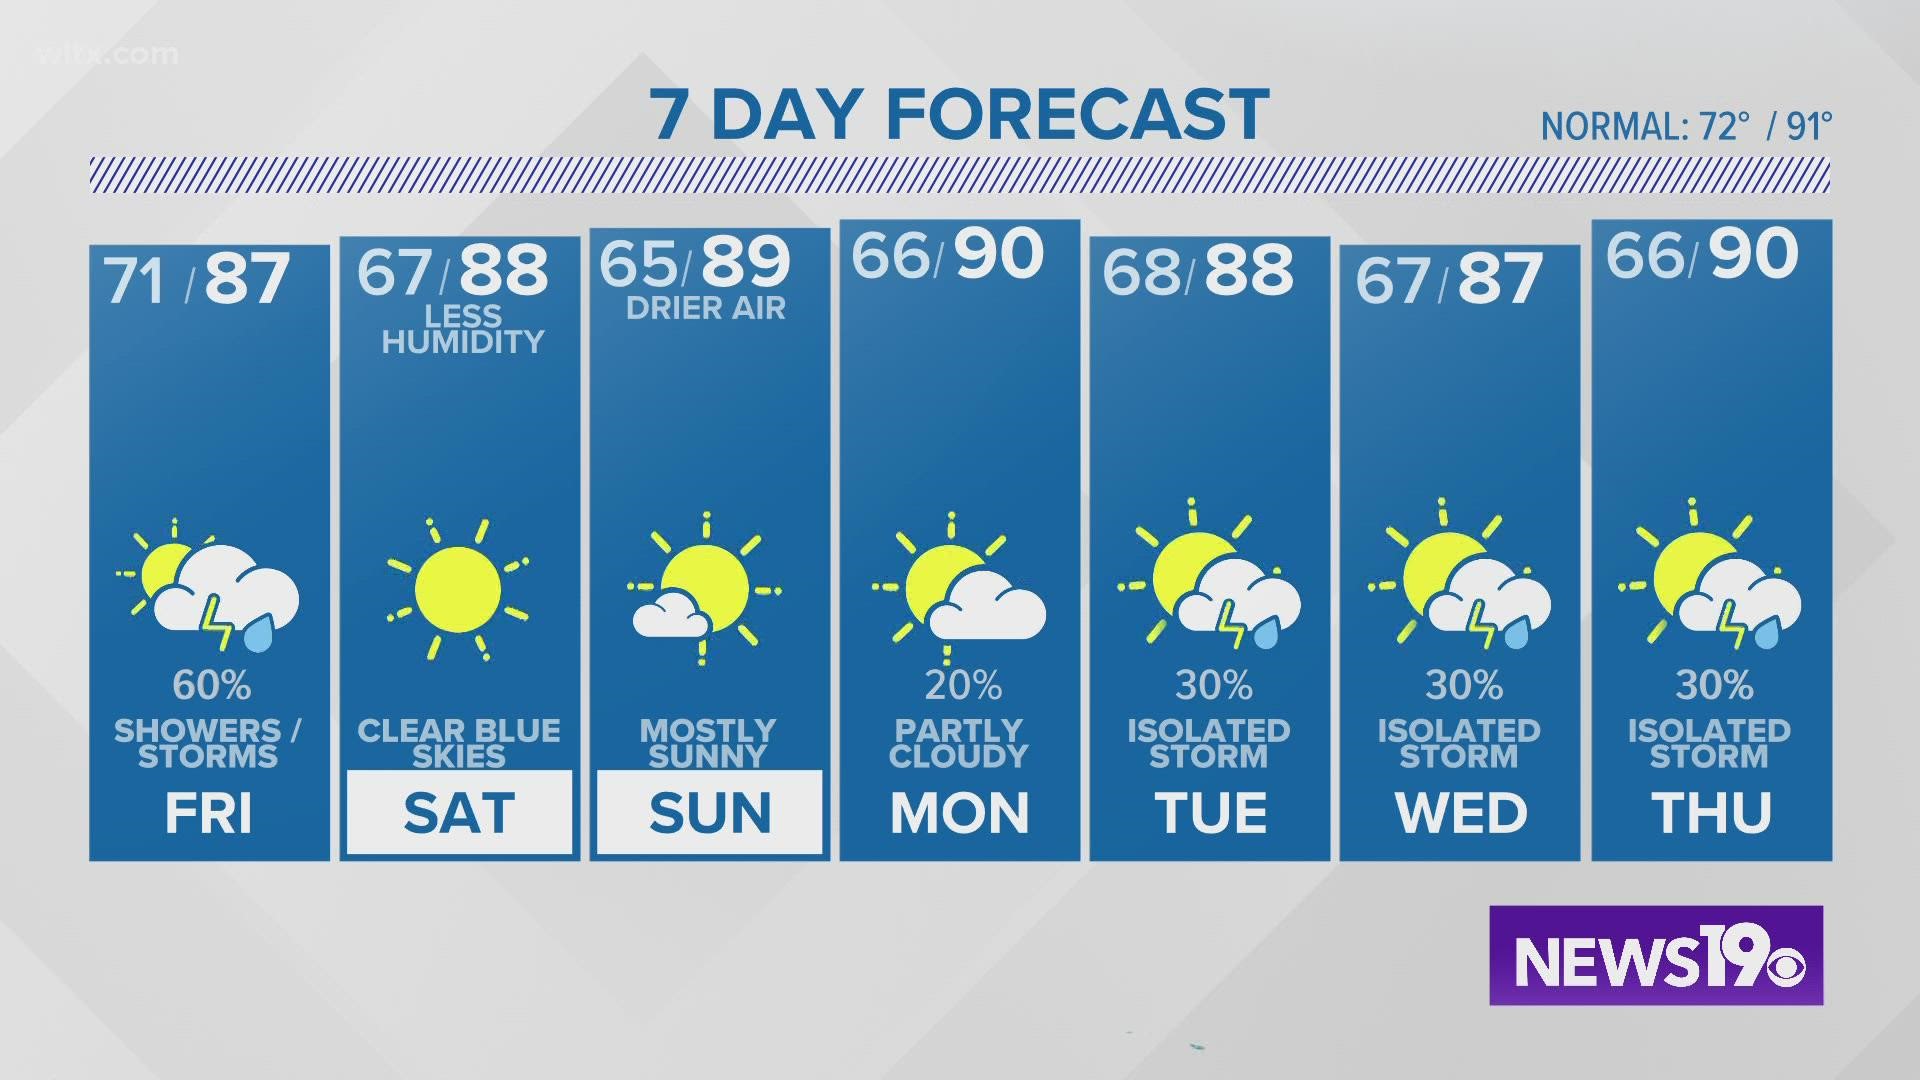 Showers and thunderstorms tonight and tomorrow could produce downpours throughout The Midlands.